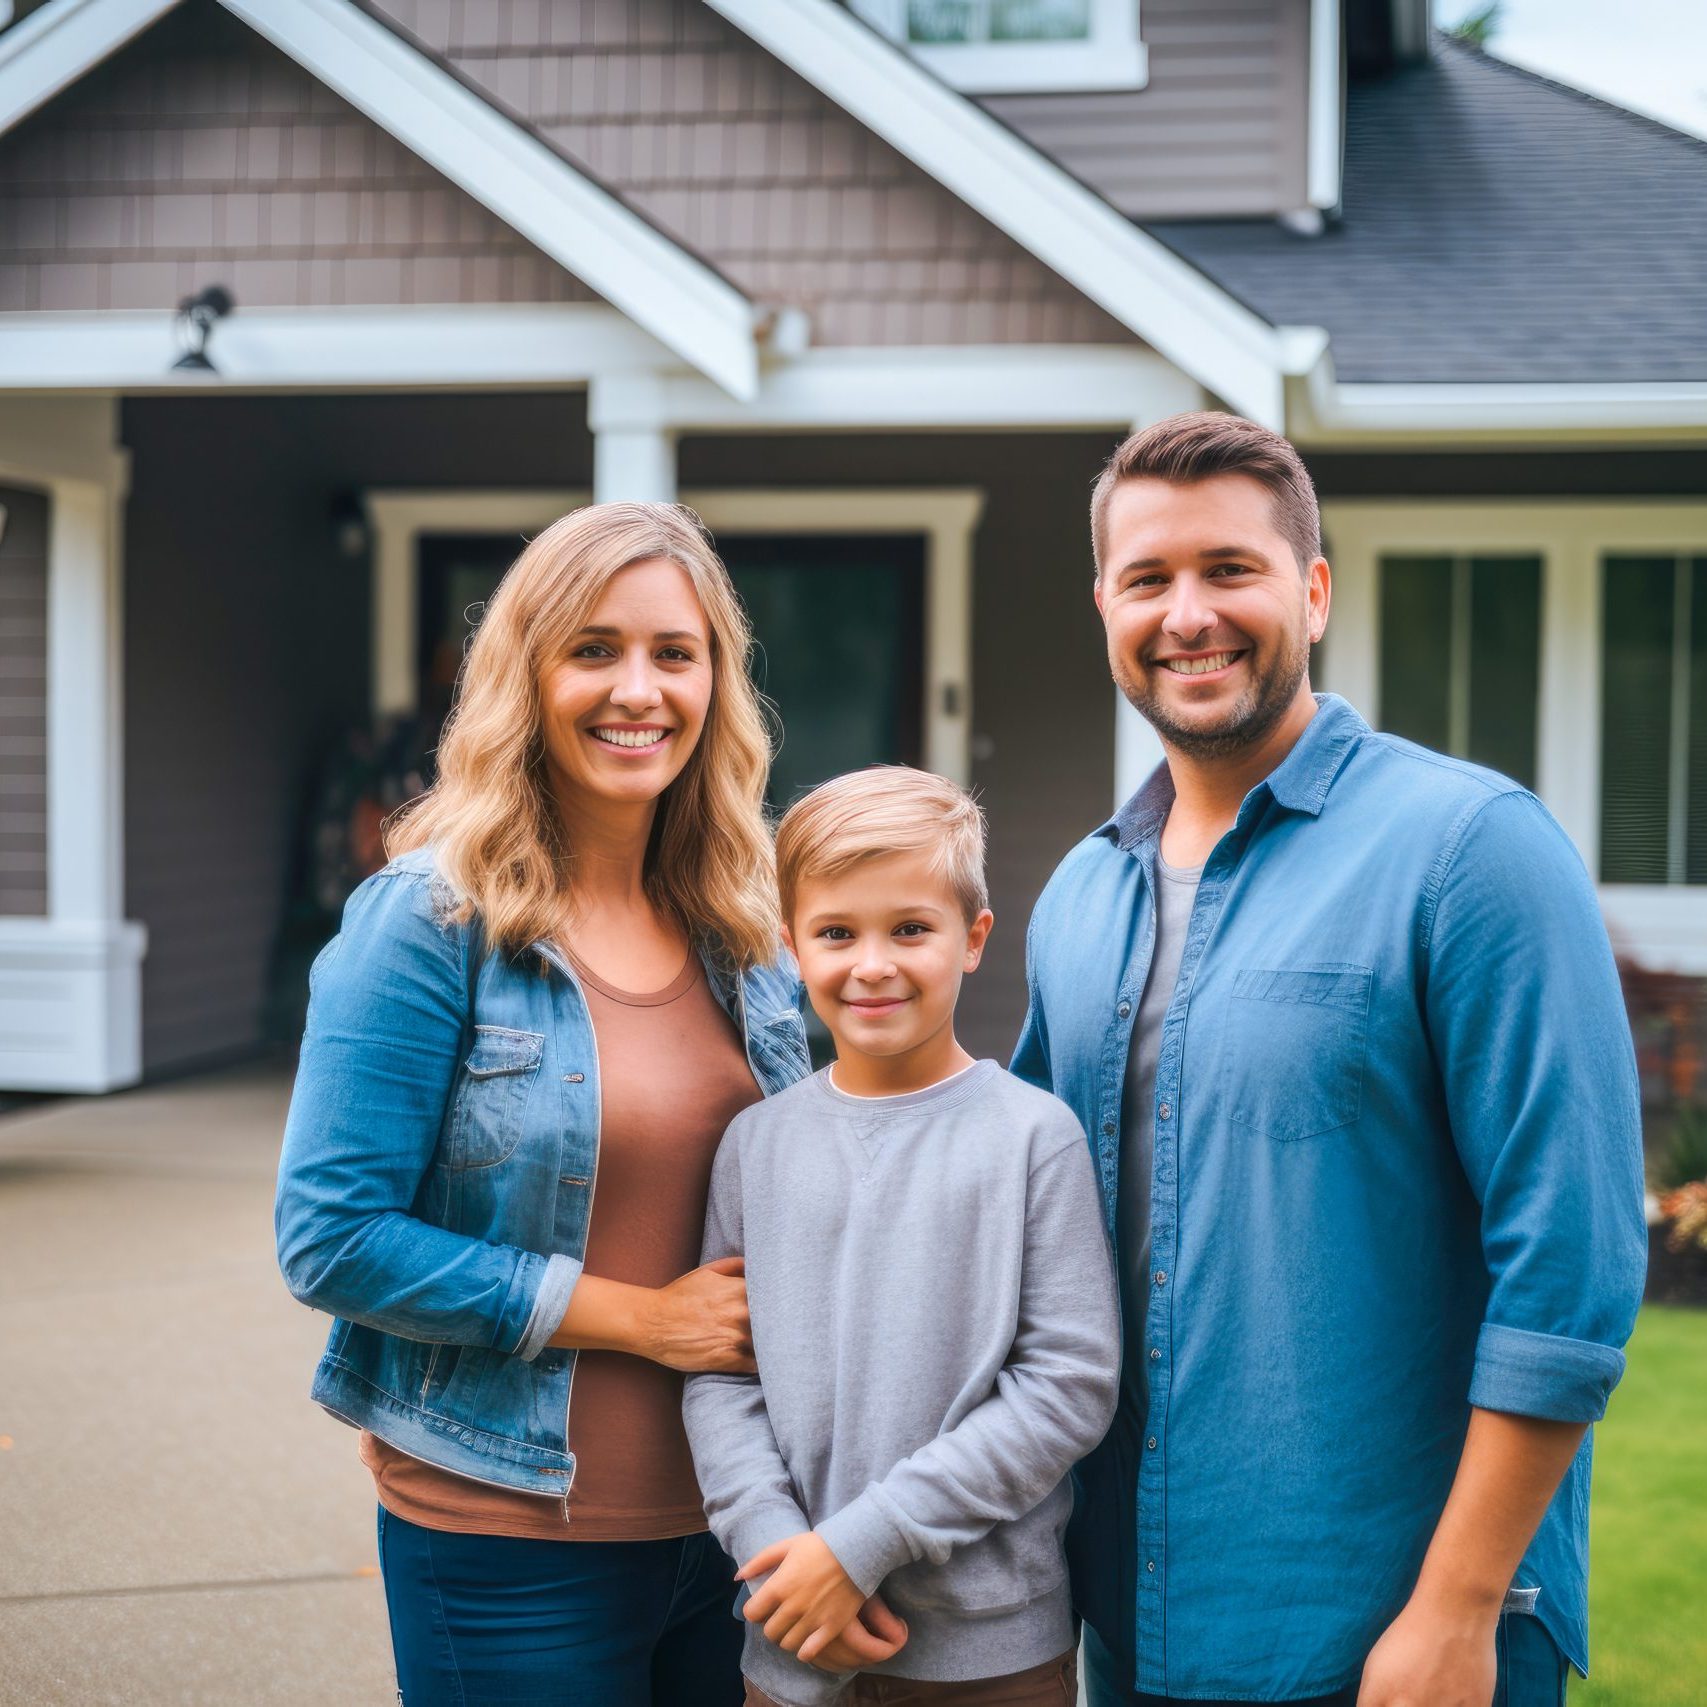 Caucasian family in front of newly purchased house, smiling proudly. Home ownership, real estate and a life goal accomplishment